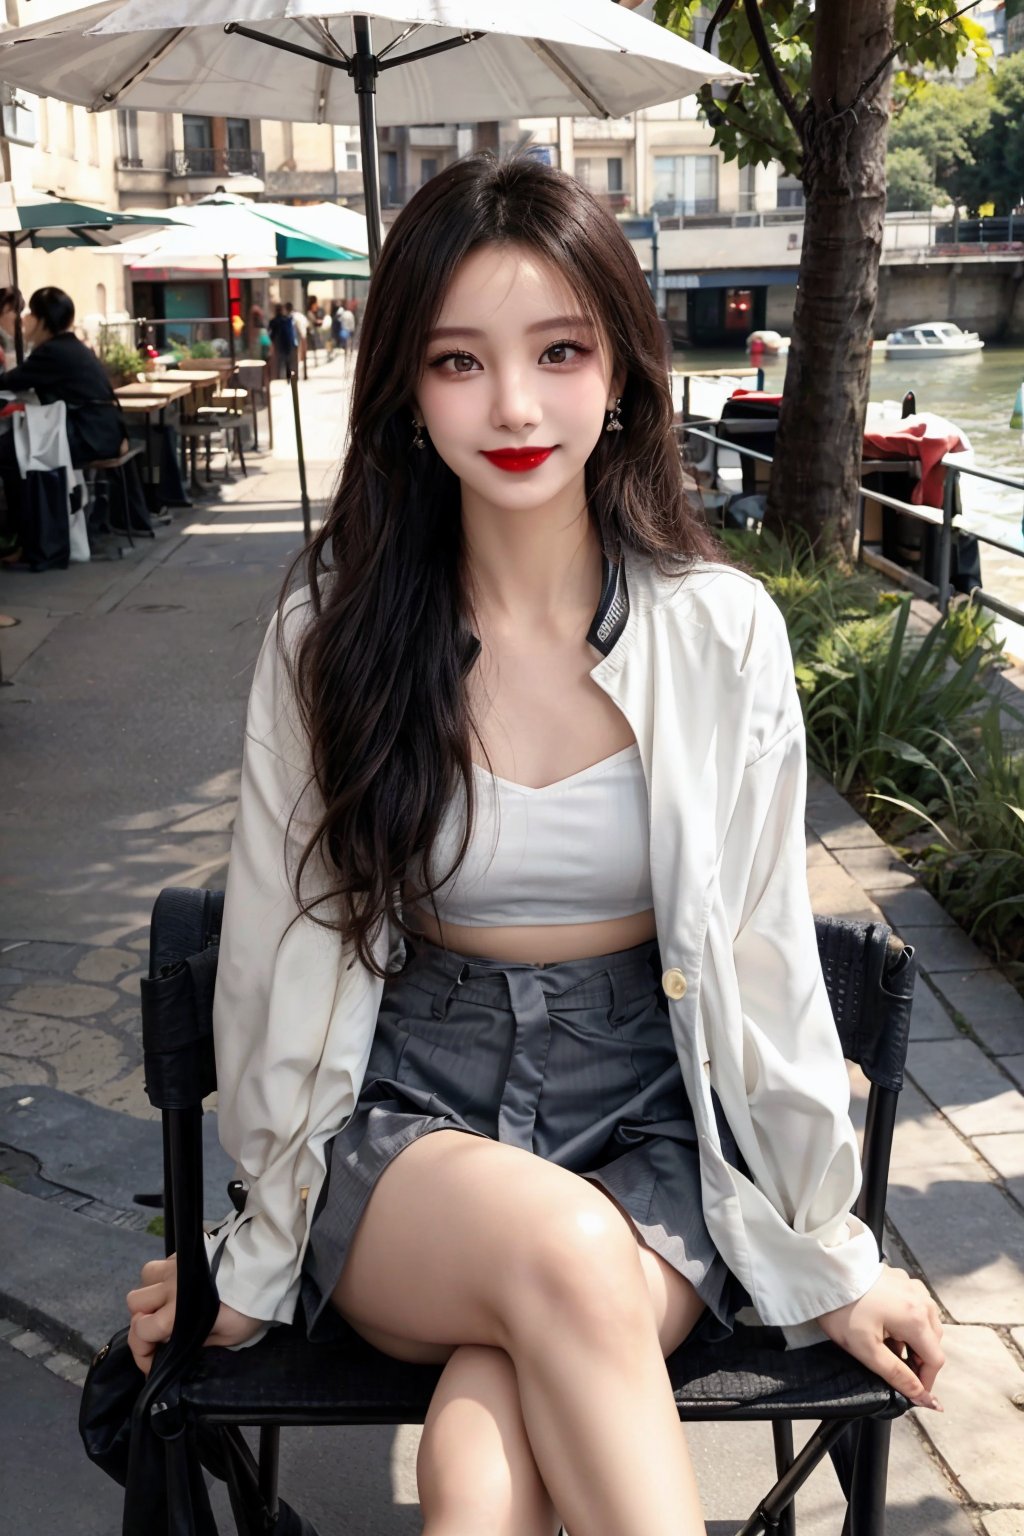 A stunning Parisian street scene: A beautiful Korean girl, approximately 20 years old, sits solo at an outdoor cafe beneath a parasol. She wears a white tight suit with a laced blouse and jacket, paired with a tight short skirt. Her dark hair falls past her waist in loose, curly locks.

She sits close-legged on the chair, legs crossed at the ankles, sipping coffee with a happy smile. Dark eyes sparkle under calm expressions, delicate facial features framed by simple tiny earrings. A subtle, upturned lip pairs with dark red lipstick. The camera captures her from a cowboy shot, showcasing her entire body in sharp focus.

Background: Softly blurred cafes and buildings along the Seine River, with warm sunlight casting long shadows across the cobblestone street.